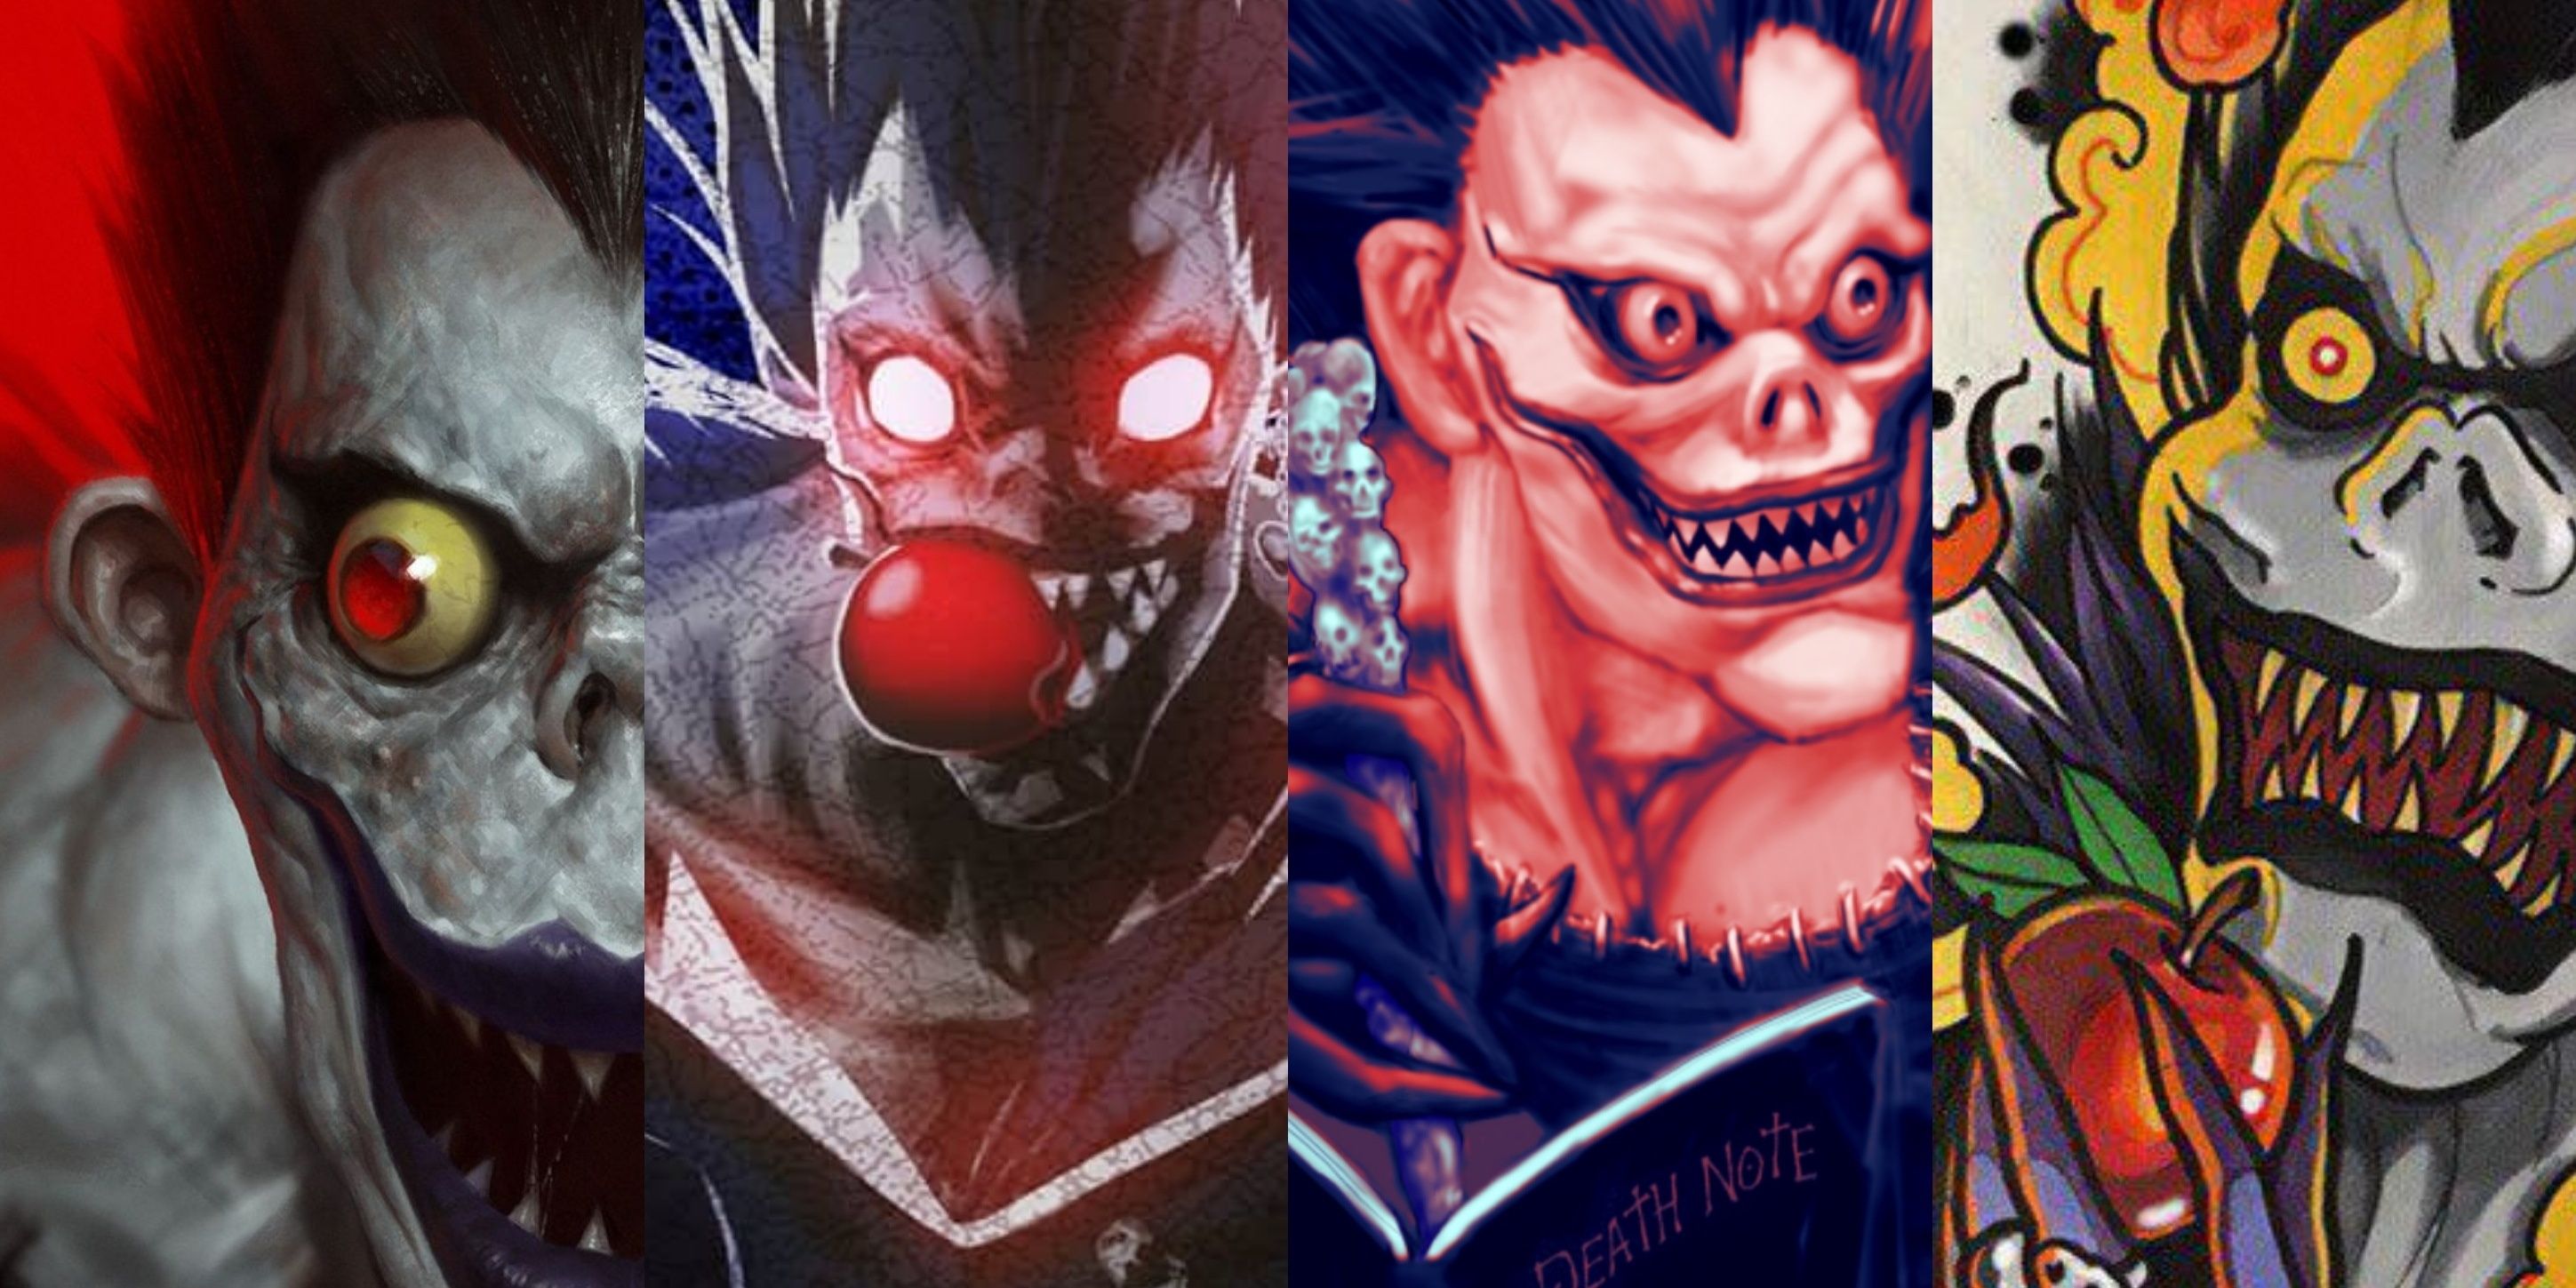 Smart Crayon - Ryuk is a antagonist in the Death Note